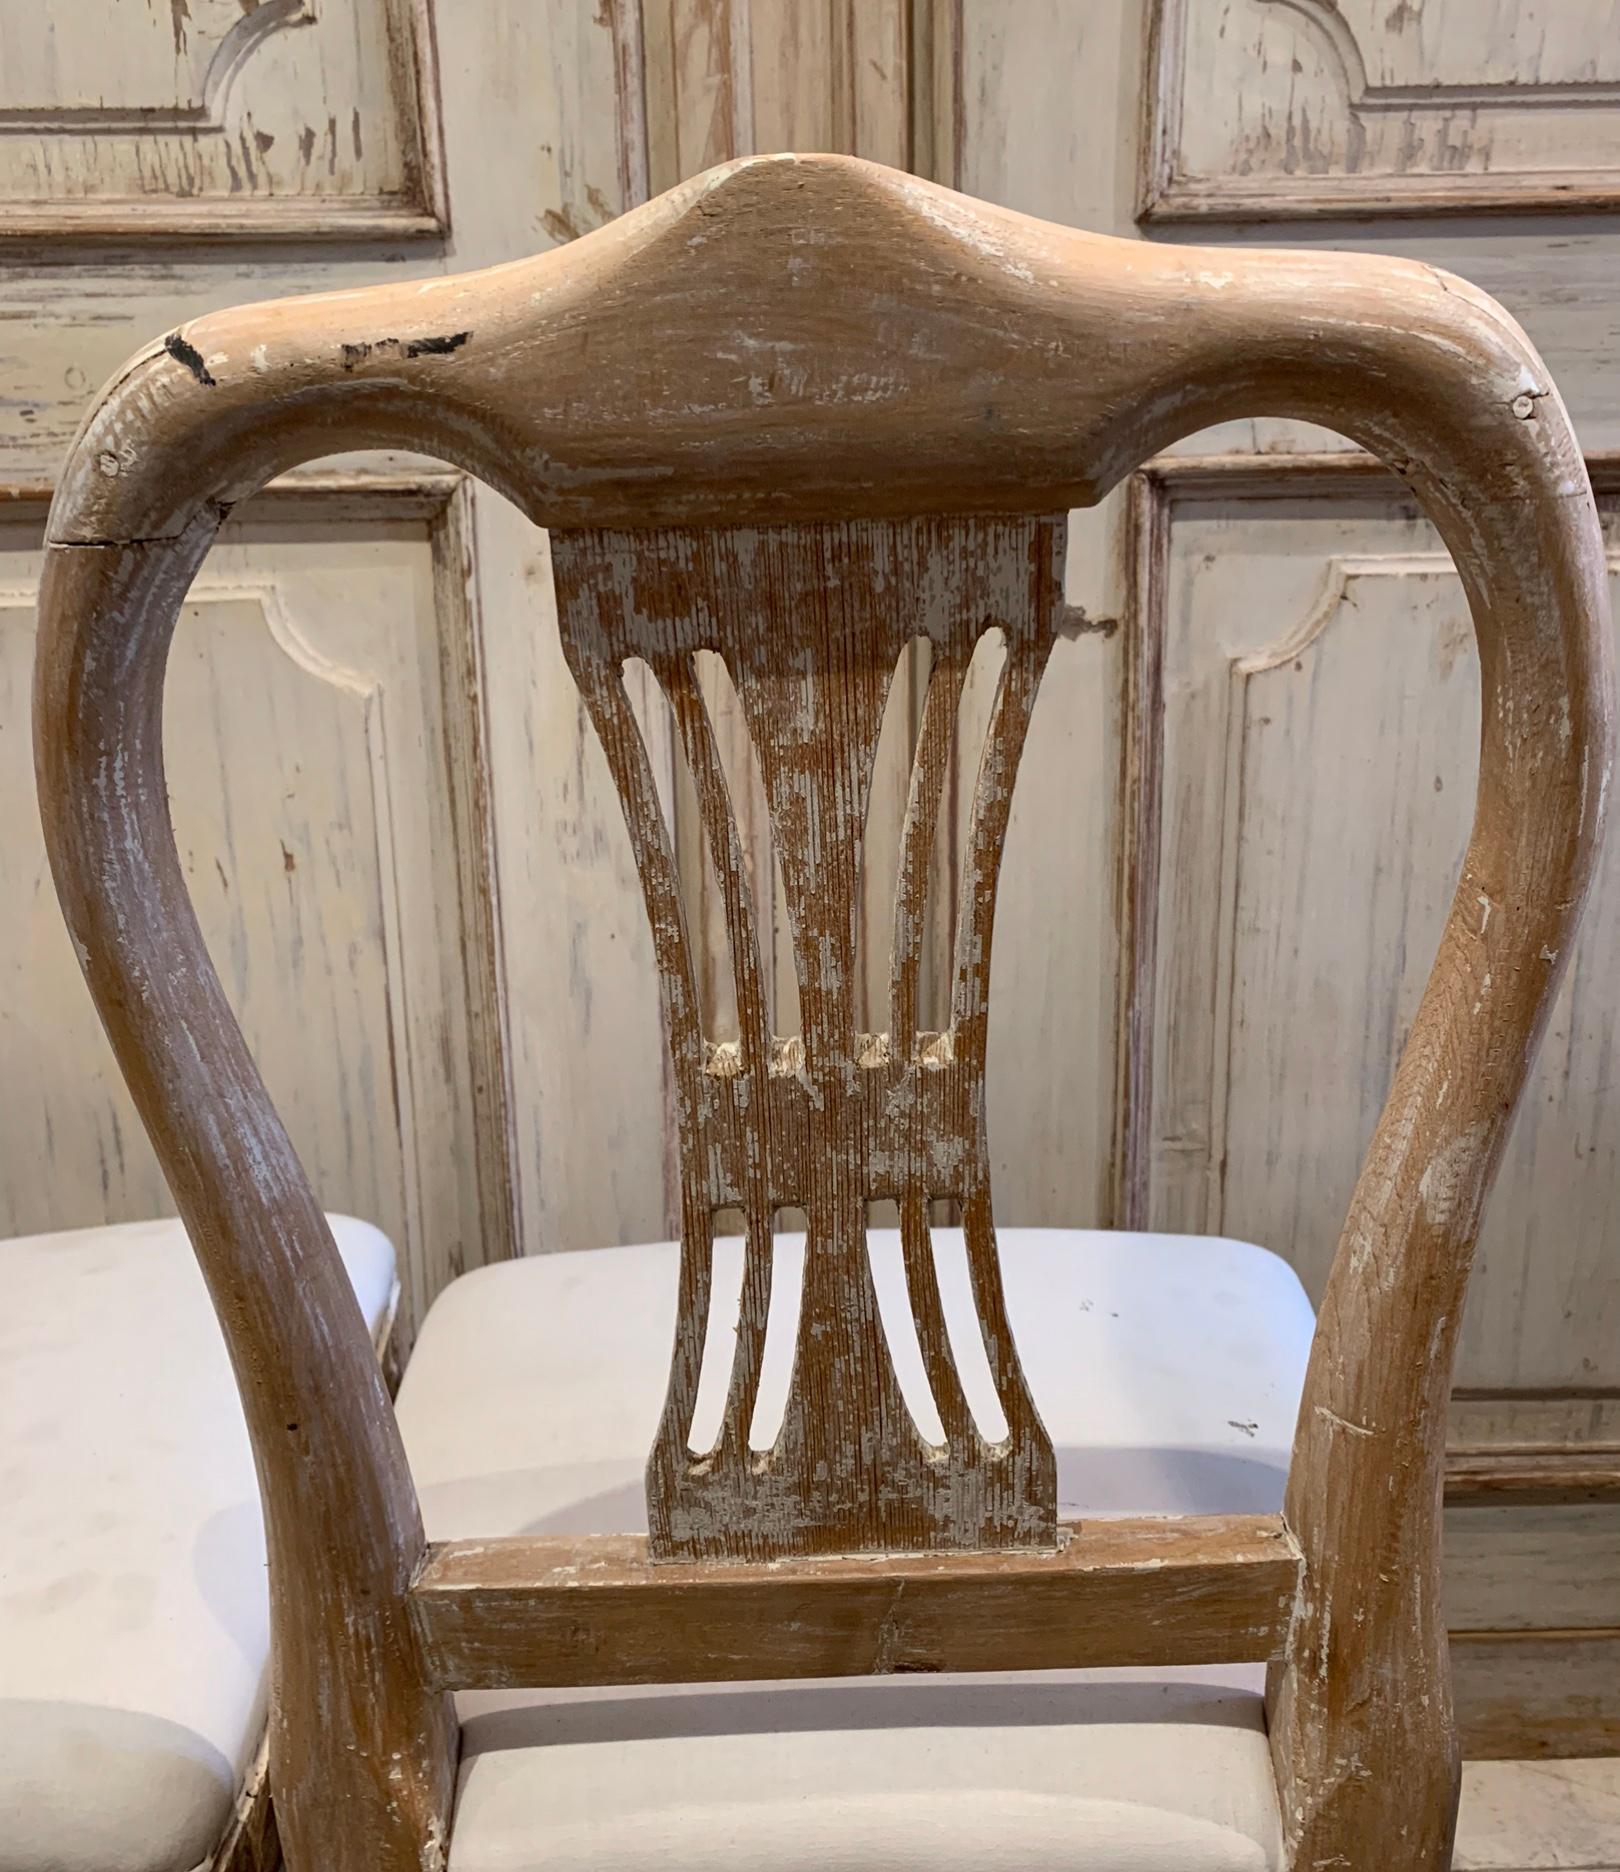 Set of four charming Swedish folk dining chairs which are made of pine. There are still some traces of historic paint on the chairs but they have been scraped back to the bare wood which gives them a more rustic feel.

Recently reupholstered in a